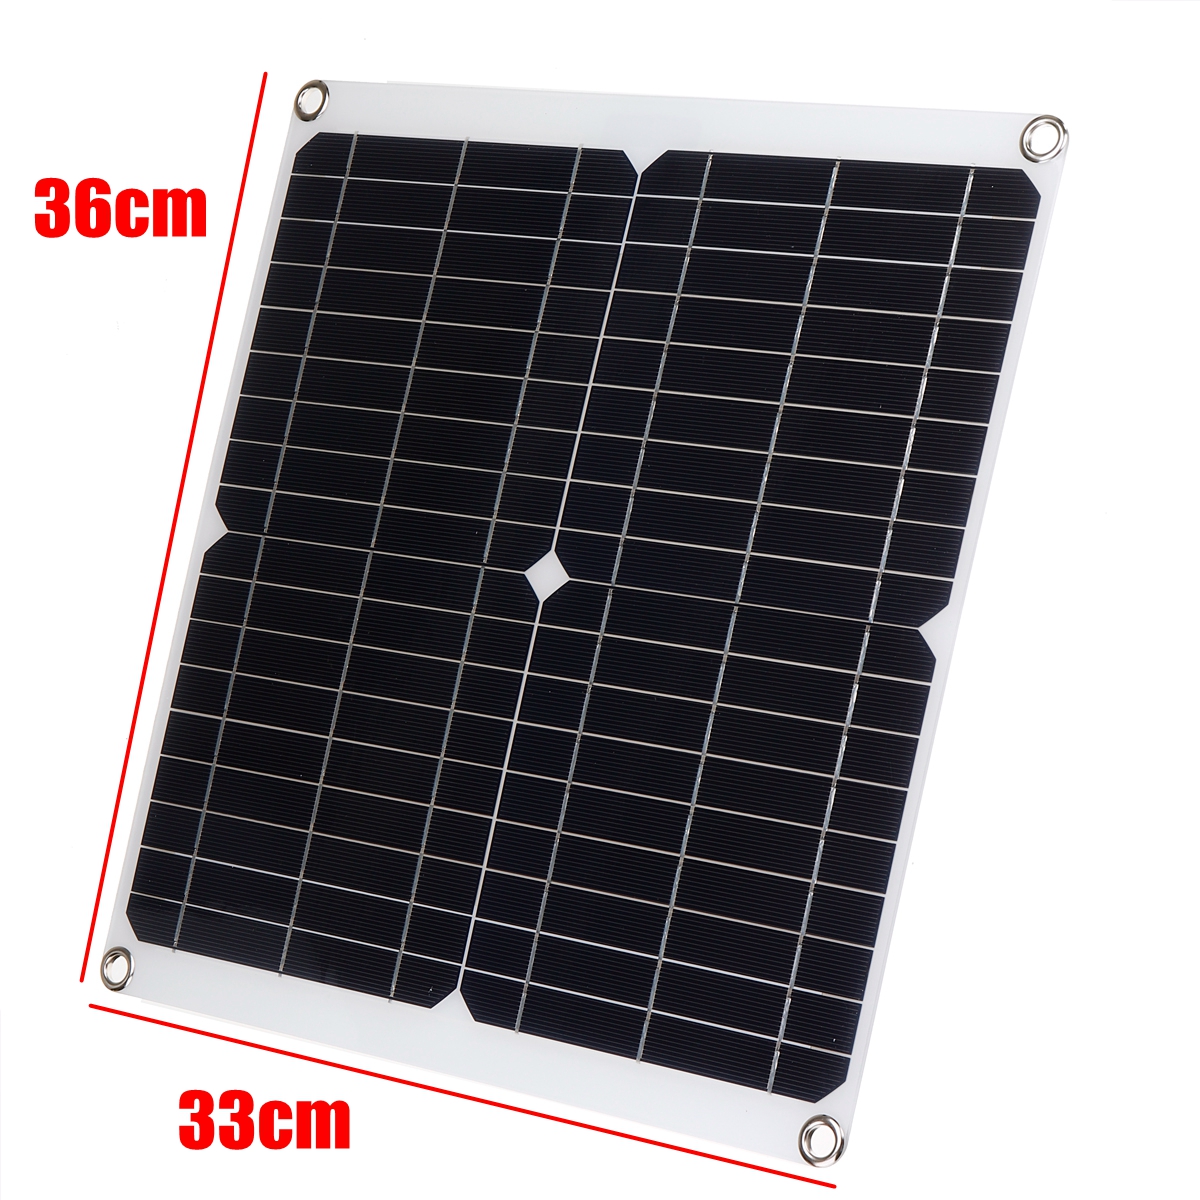 18V-50W-PV-Solar-Panel-Charger-Kit-Monocrystalline-Solar-Panels-with-10-In-1-Adapter-Cable-1779937-4